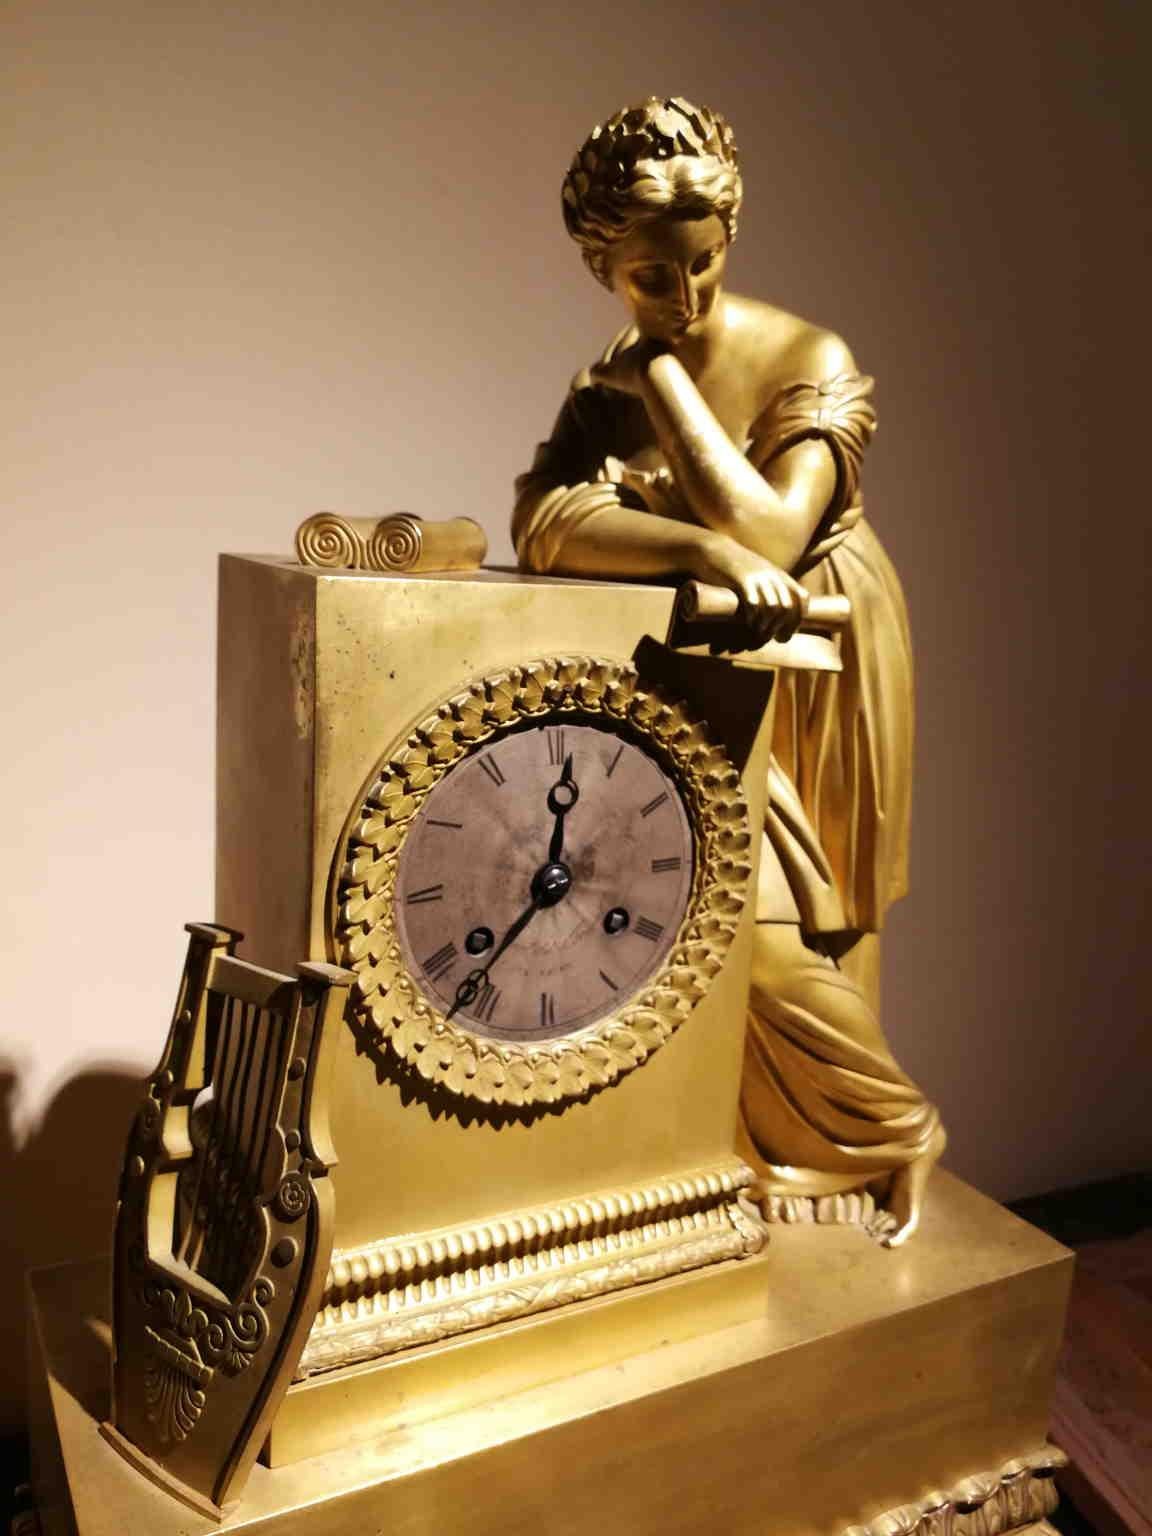 Imperial Mantel Clock signed on the clock face “Renard suc(cursale) de Frissard, à Rouen”. It’s in gilded bronze and the mechanism is still working. The figure represents a lady wearing a peplum, sandals an a laurel wreath on the head. She’s holding